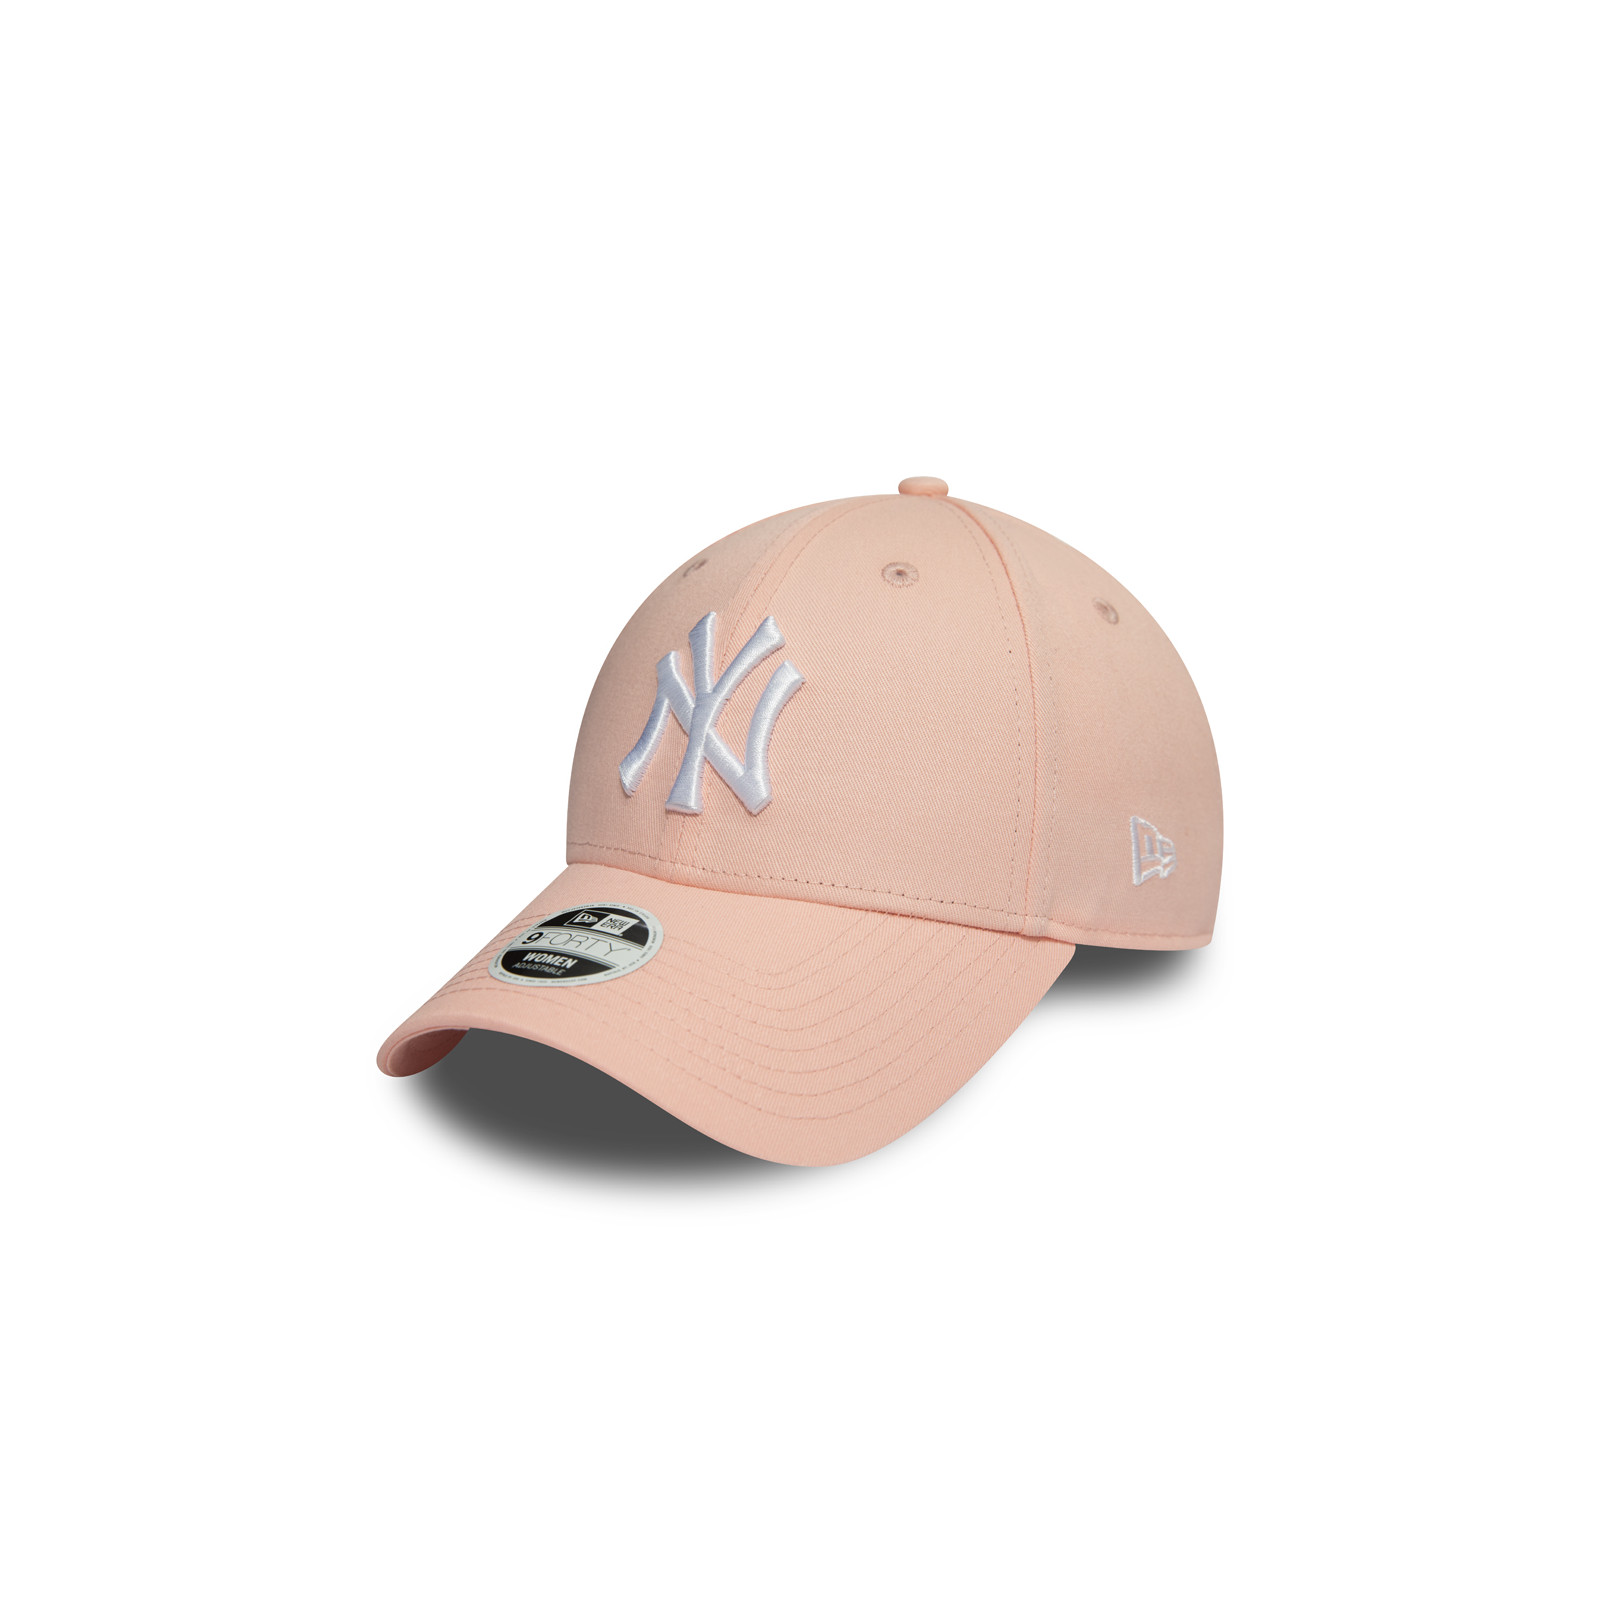 NEW ERA KIDS LEAGUE ESSENTIAL 940 NY PINK CHILD